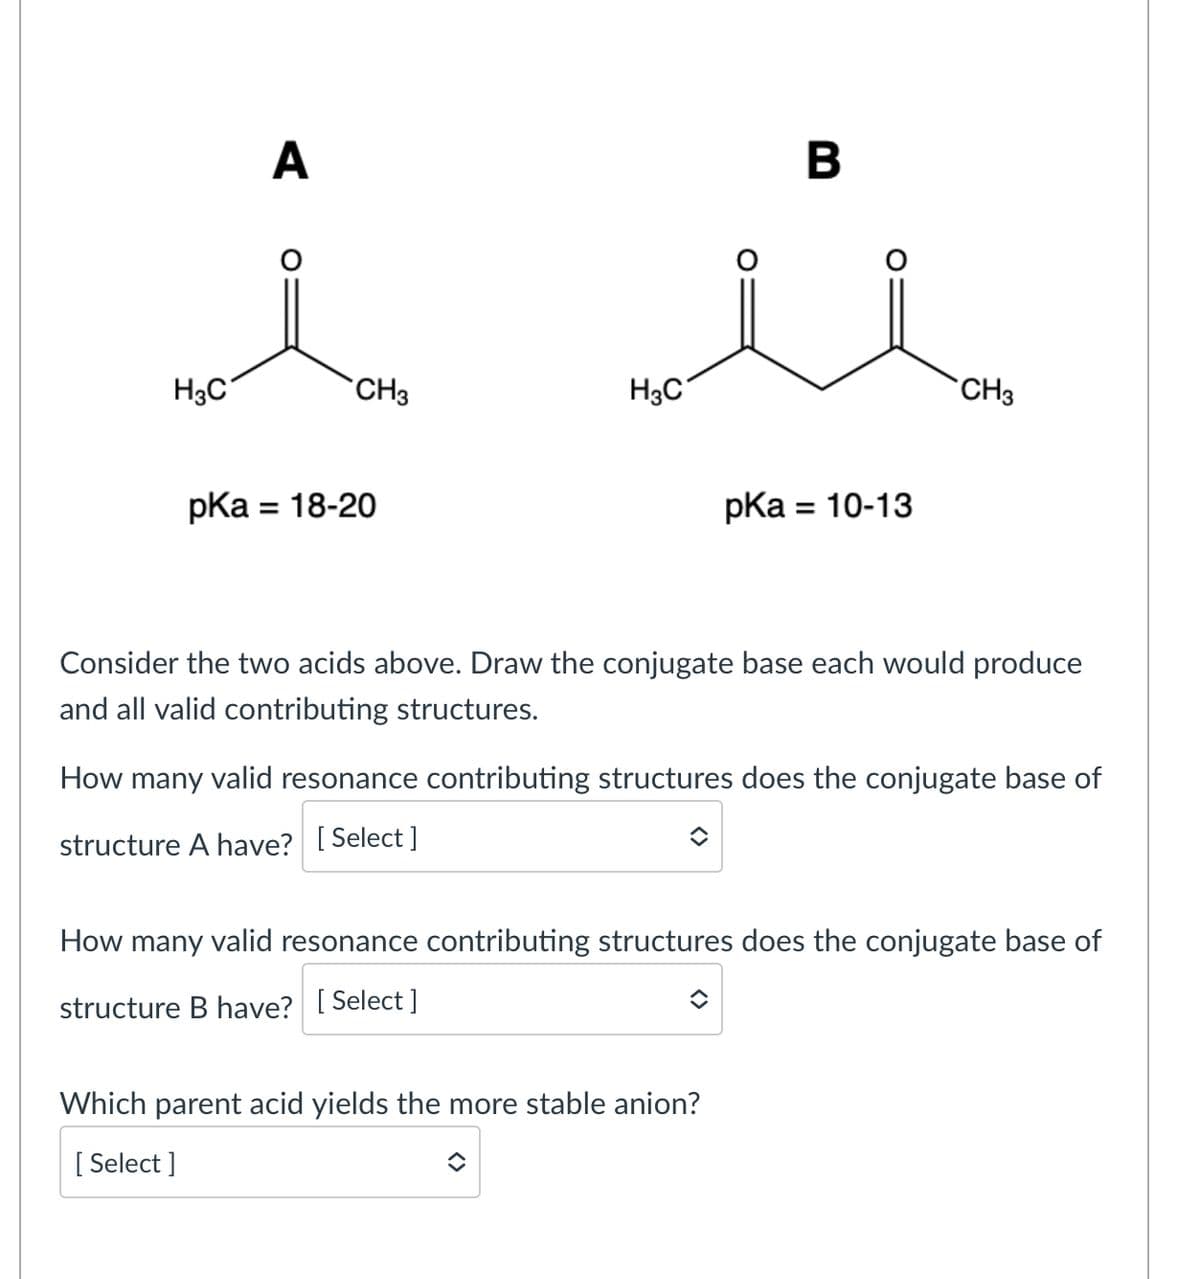 A
H3C
CH3
H3C
pka
= 18-20
B
pka
= 10-13
CH3
Consider the two acids above. Draw the conjugate base each would produce
and all valid contributing structures.
How many valid resonance contributing structures does the conjugate base of
structure A have? [Select]
How many valid resonance contributing structures does the conjugate base of
structure B have? [Select]
Which parent acid yields the more stable anion?
[Select]